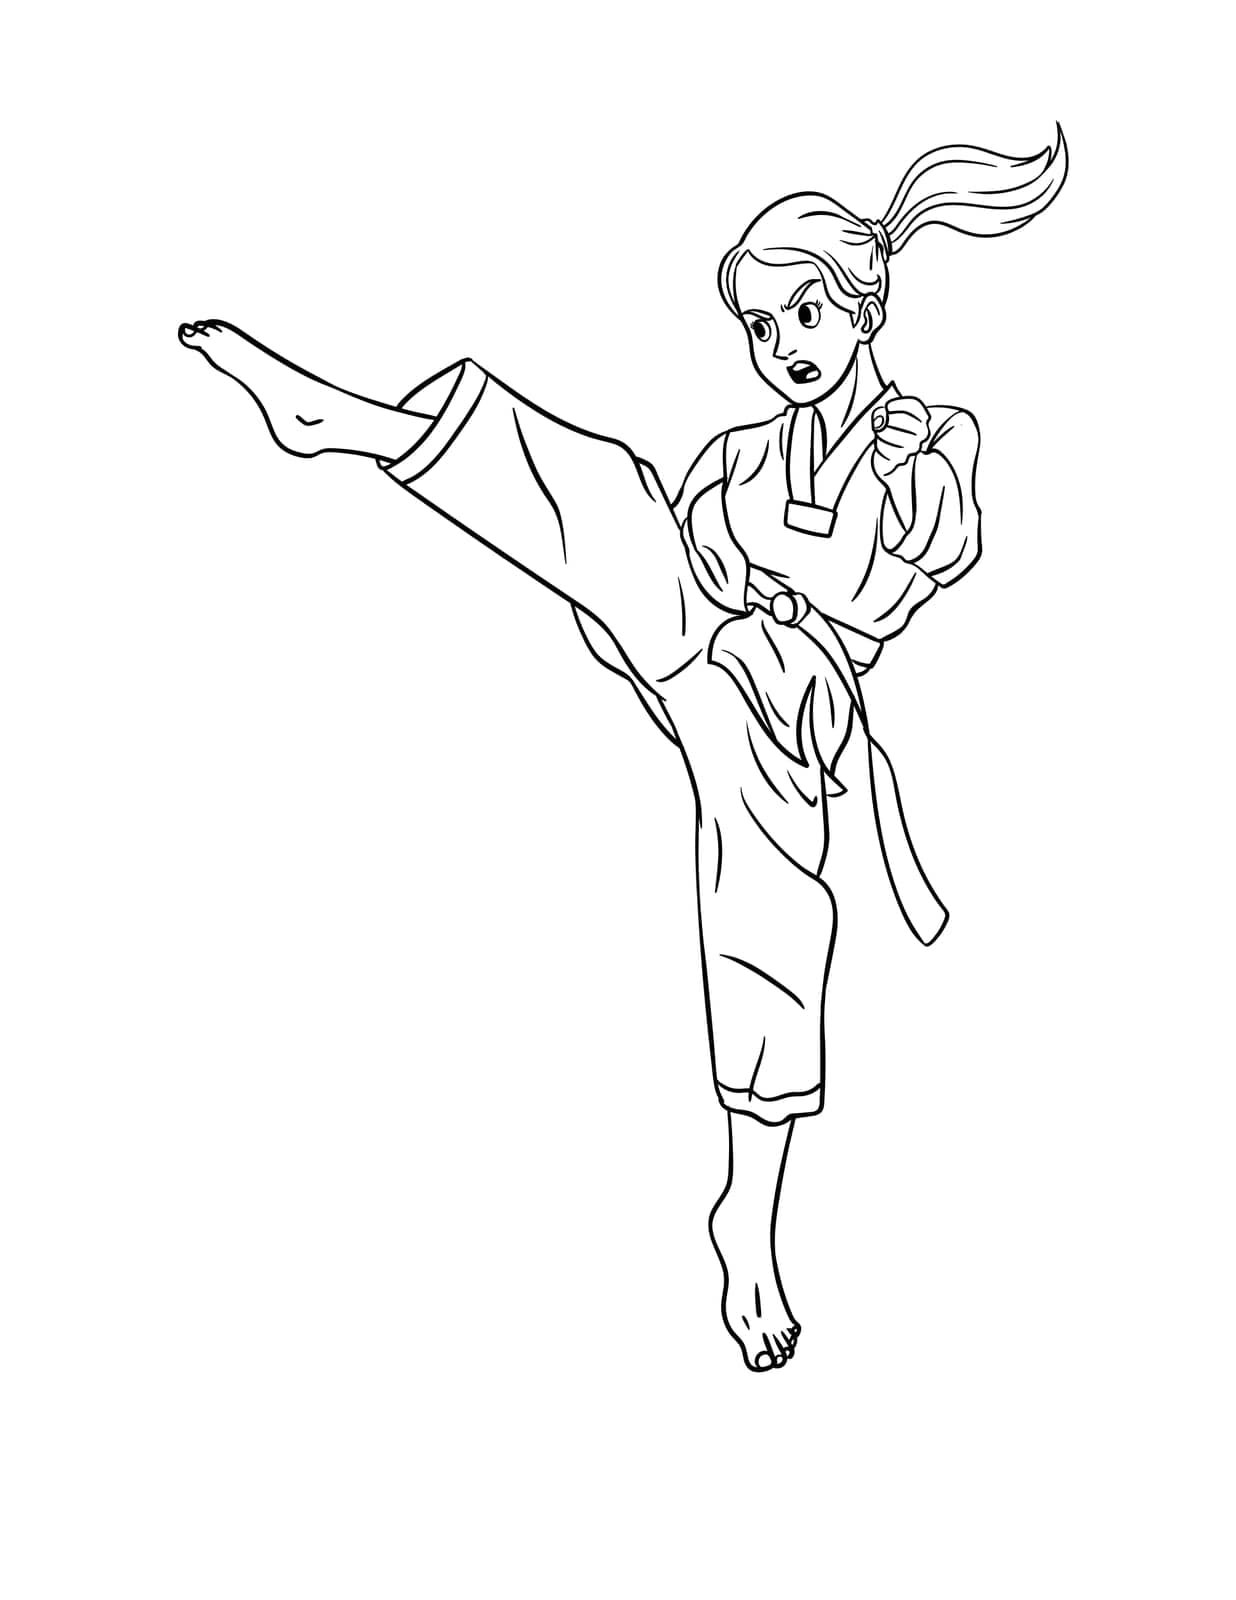 Taekwondo Isolated Coloring Page for Kids by abbydesign